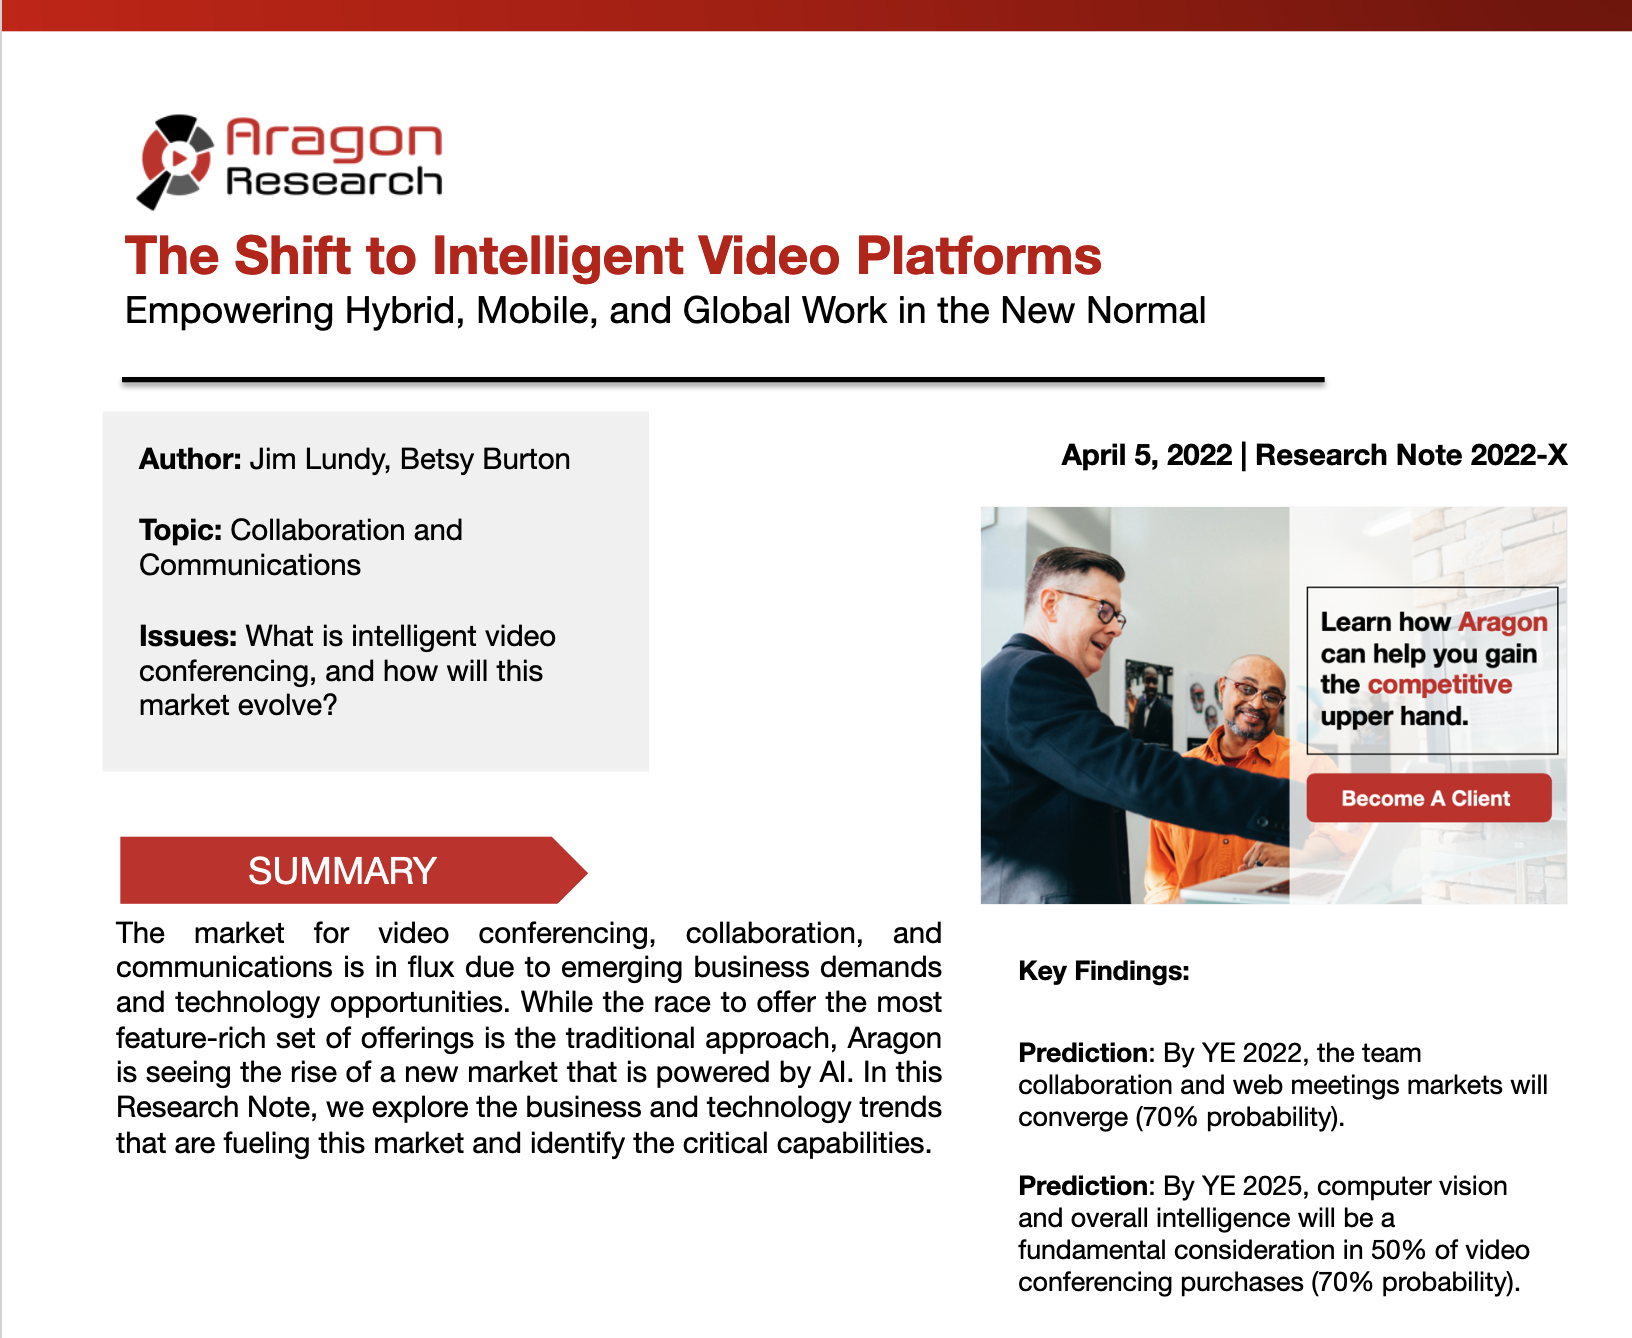 The Shift to Intelligent Video Platforms